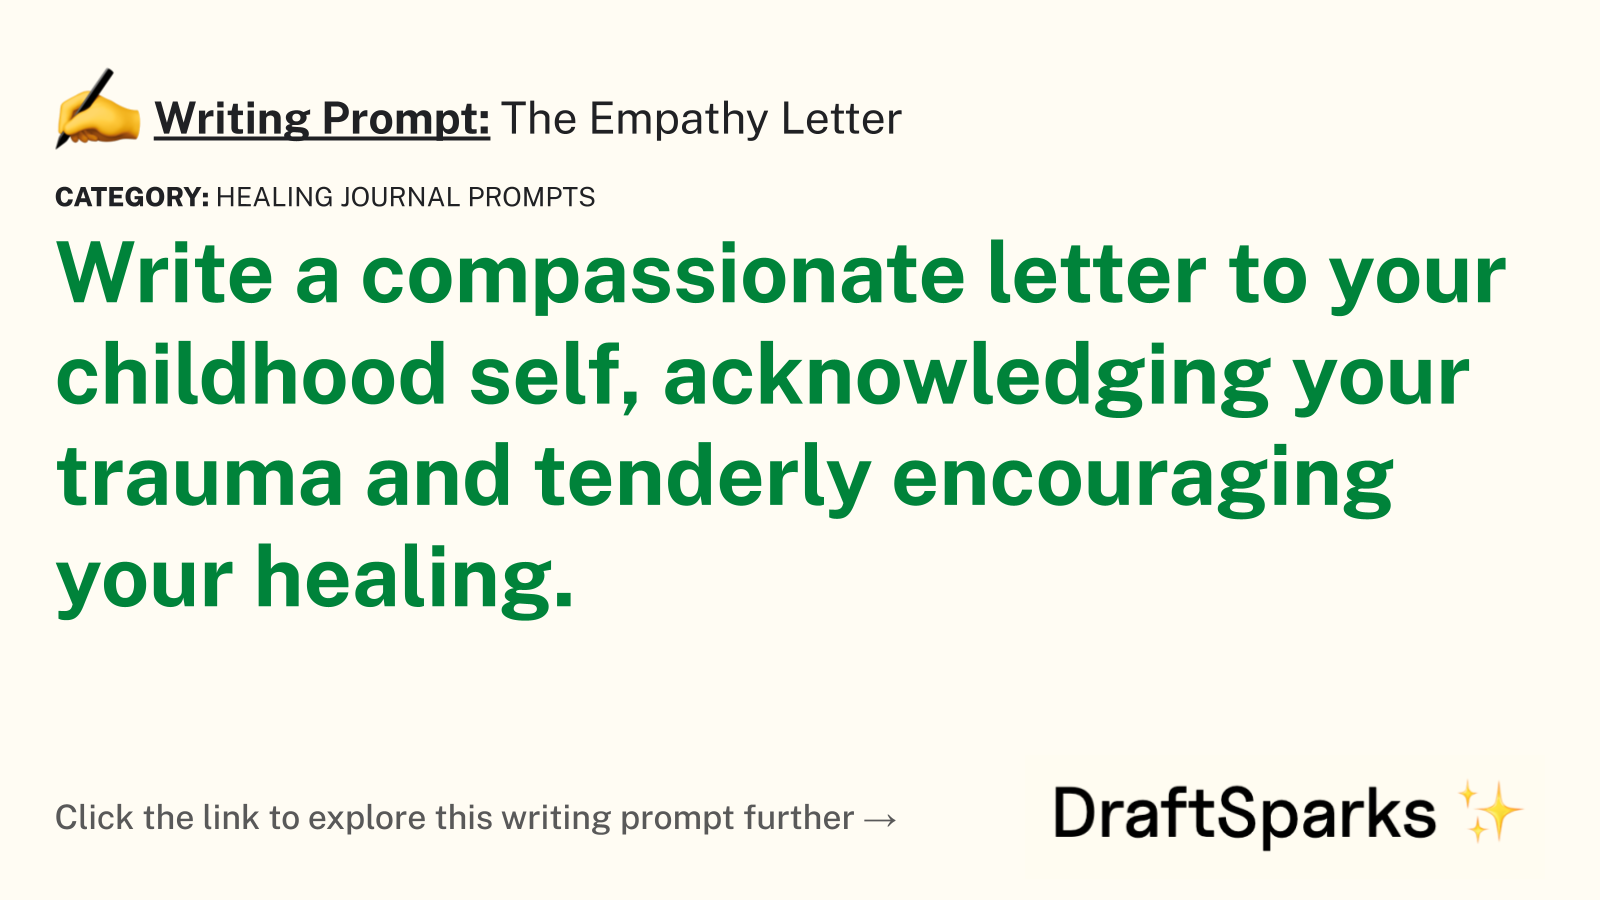 The Empathy Letter